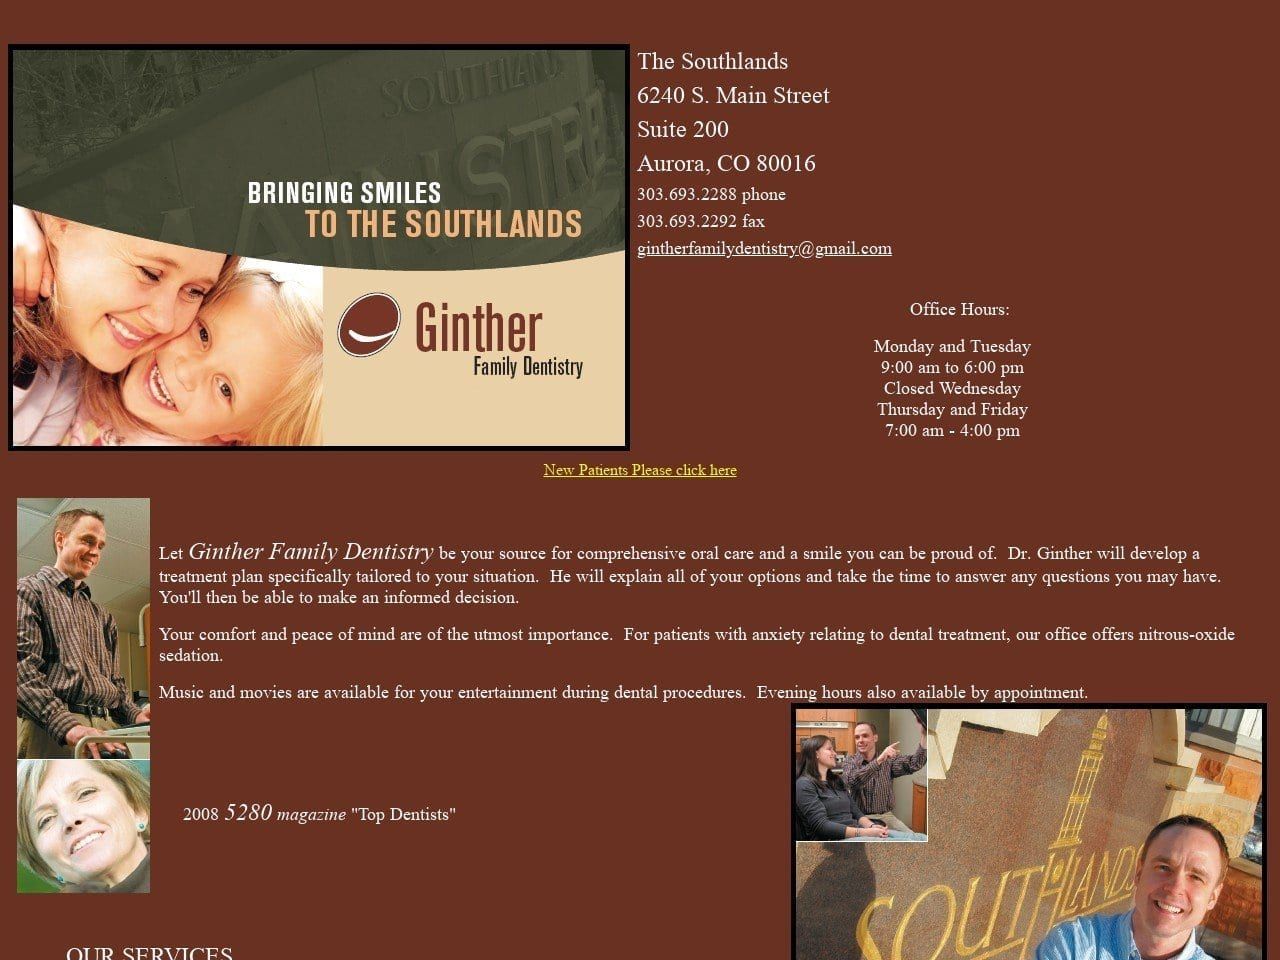 Ginther Family Dentist Website Screenshot from gintherfamilydentistry.com